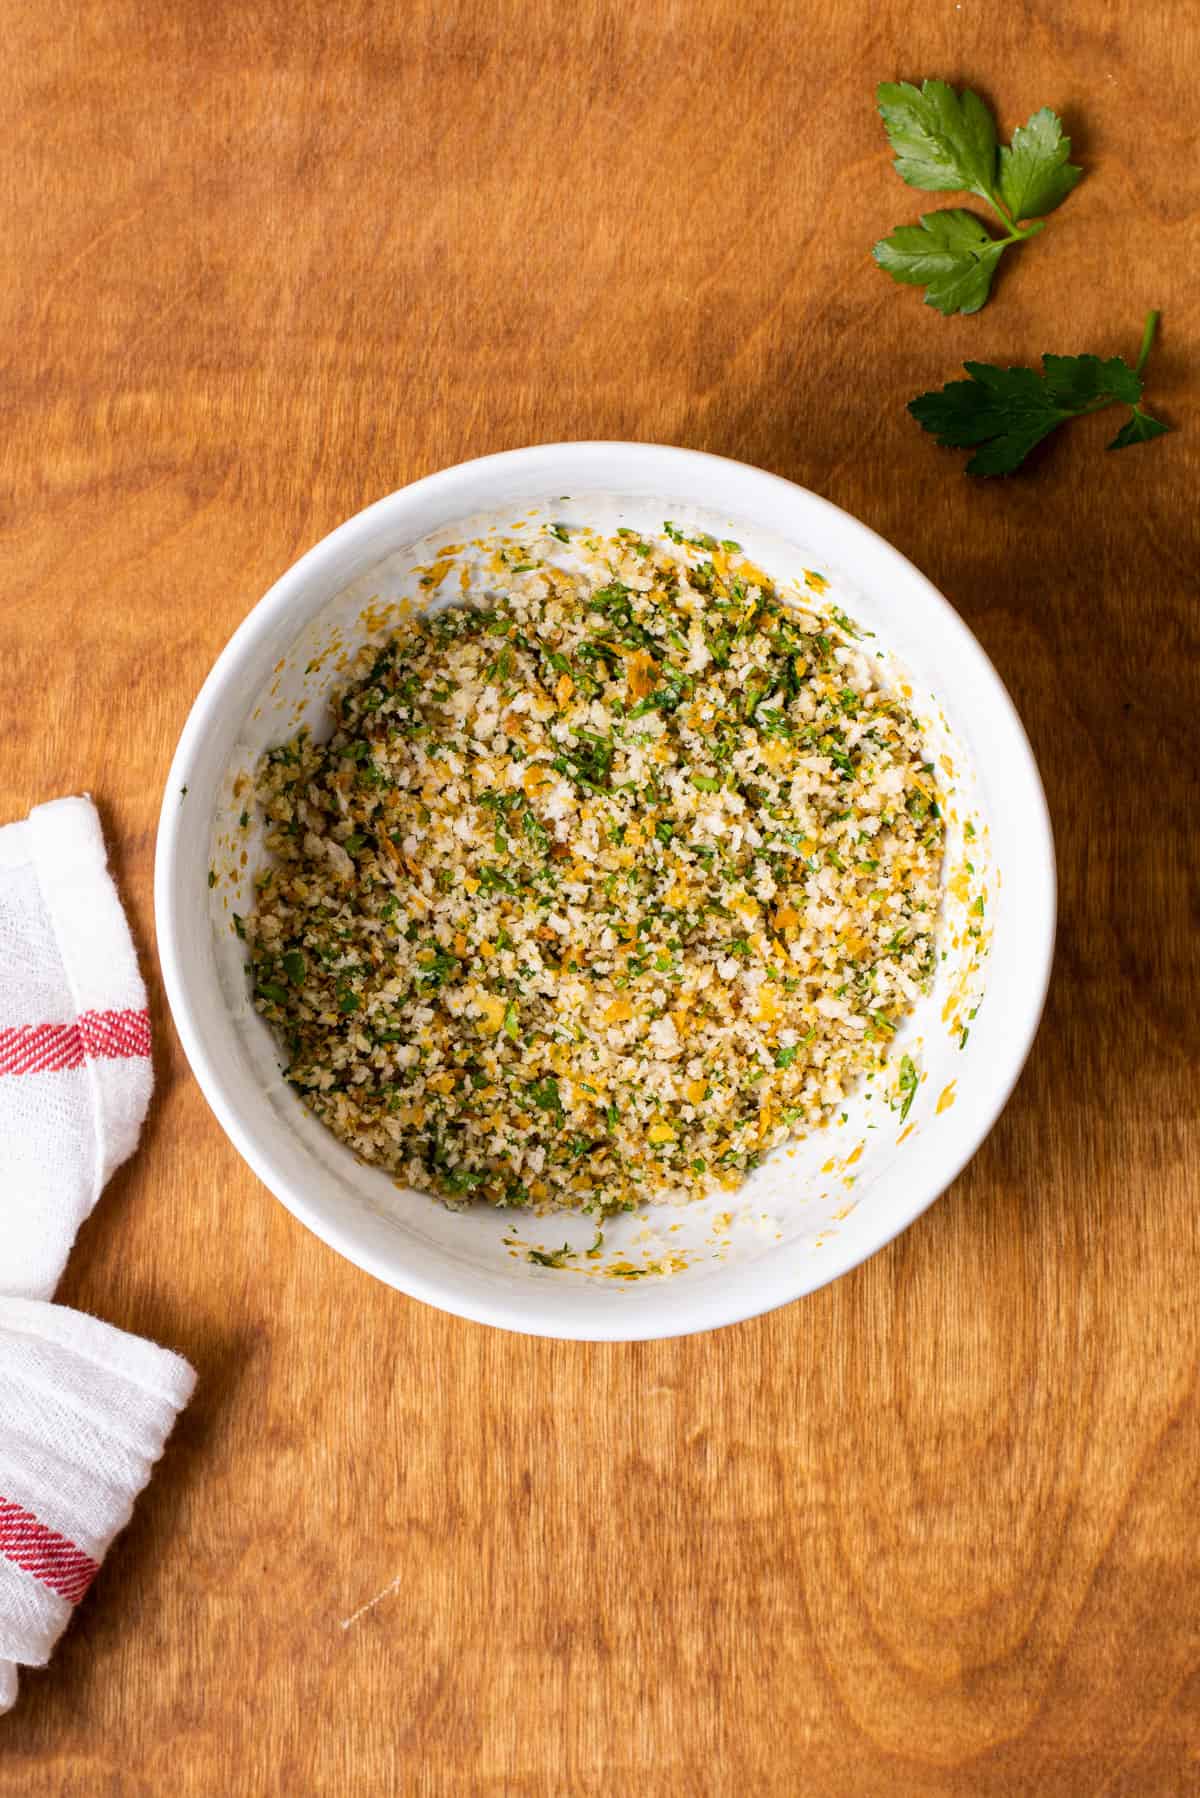 Panko-parsley mixture in a white bowl.